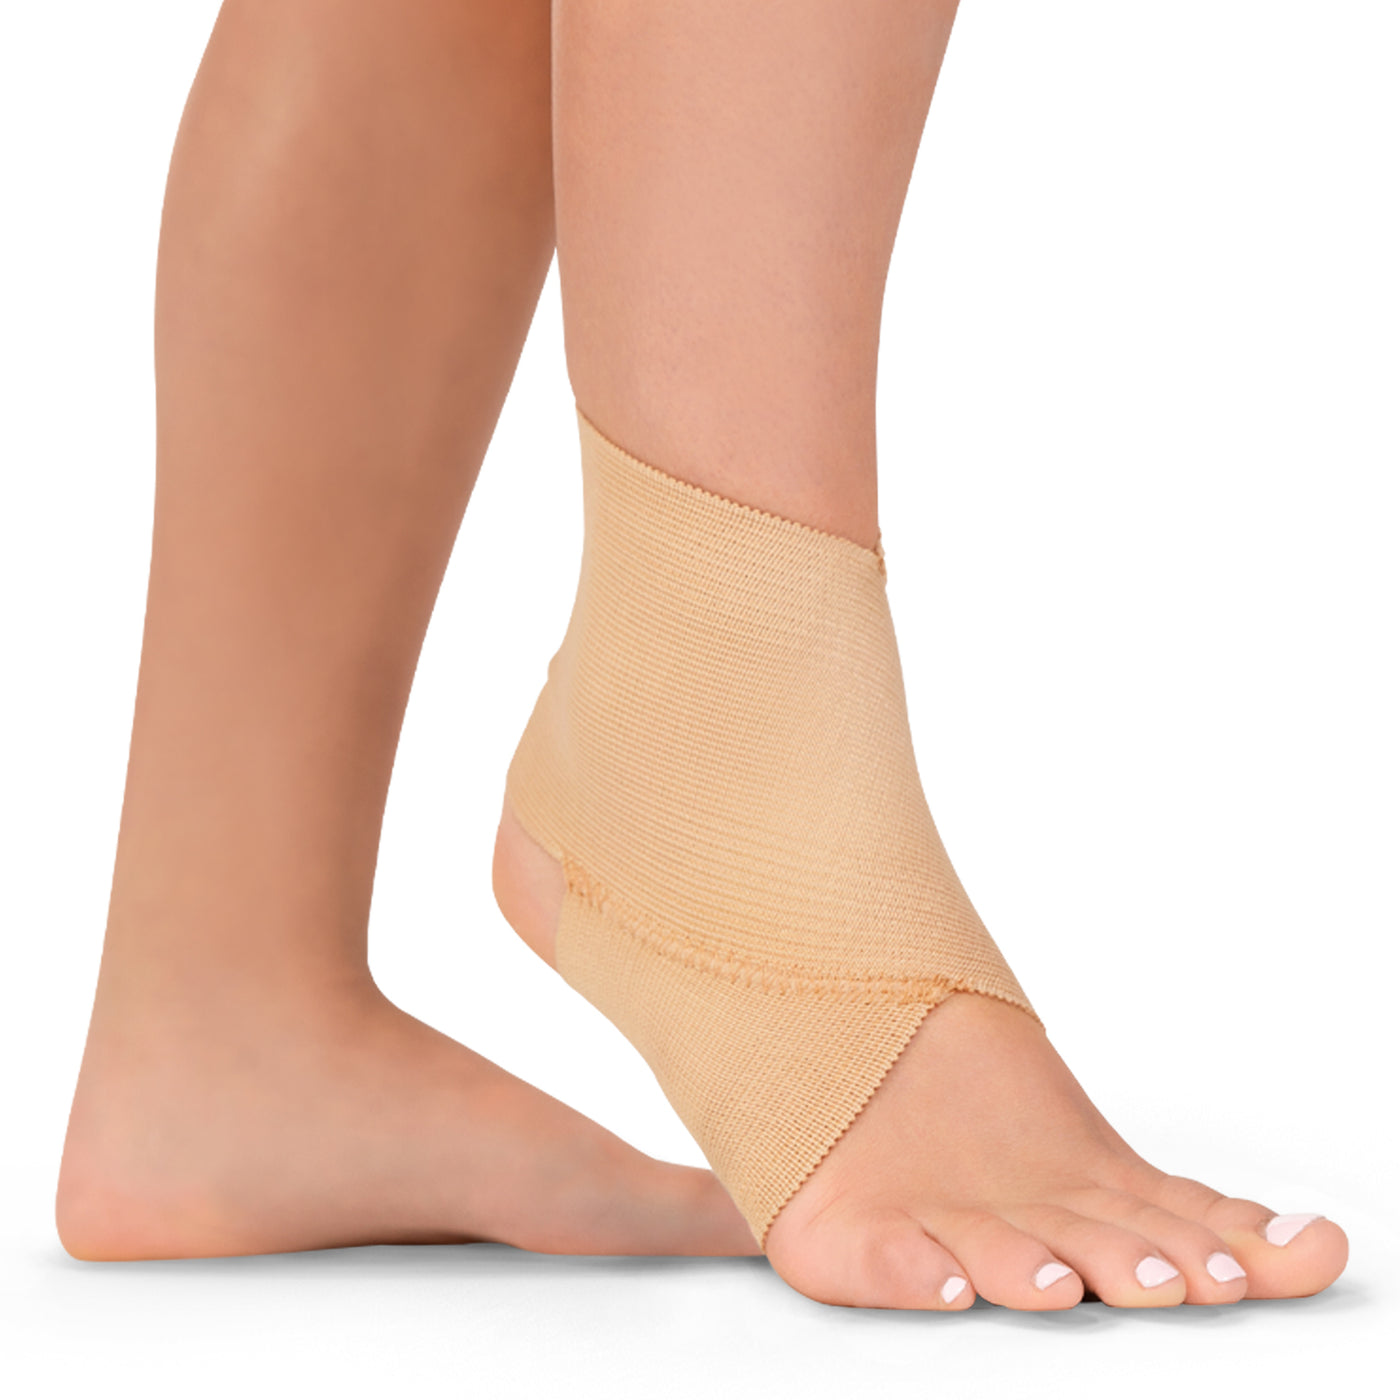 Elastic ankle brace to support sprained ankles or during gymnastics